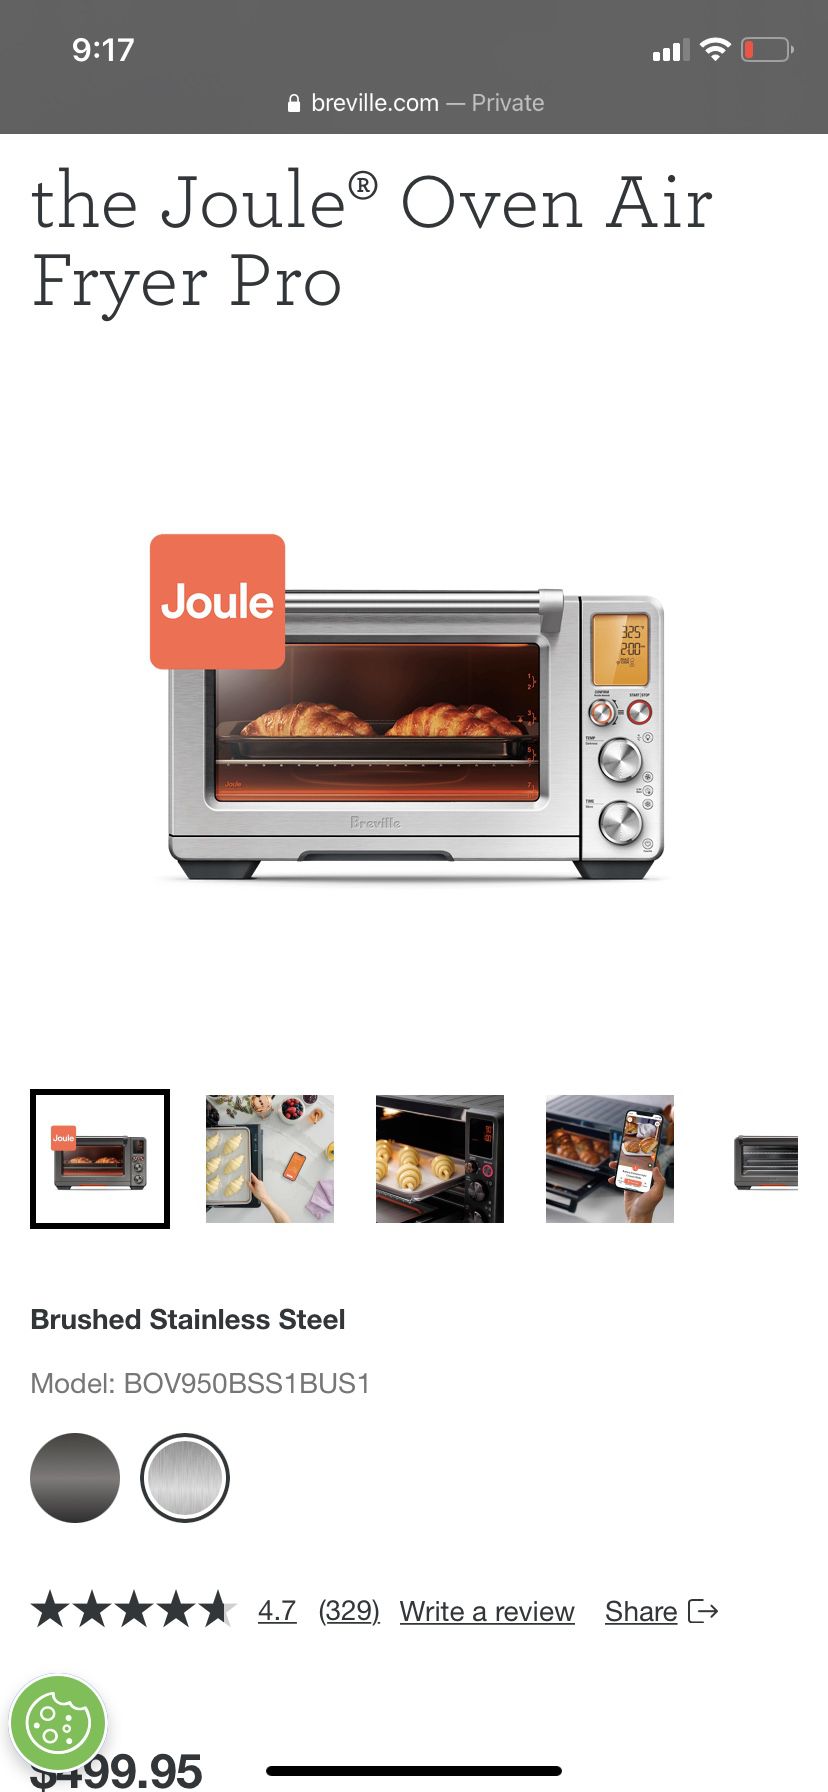 Breville Joule Brushed Stainless Steel Oven Air Fryer Pro + Reviews